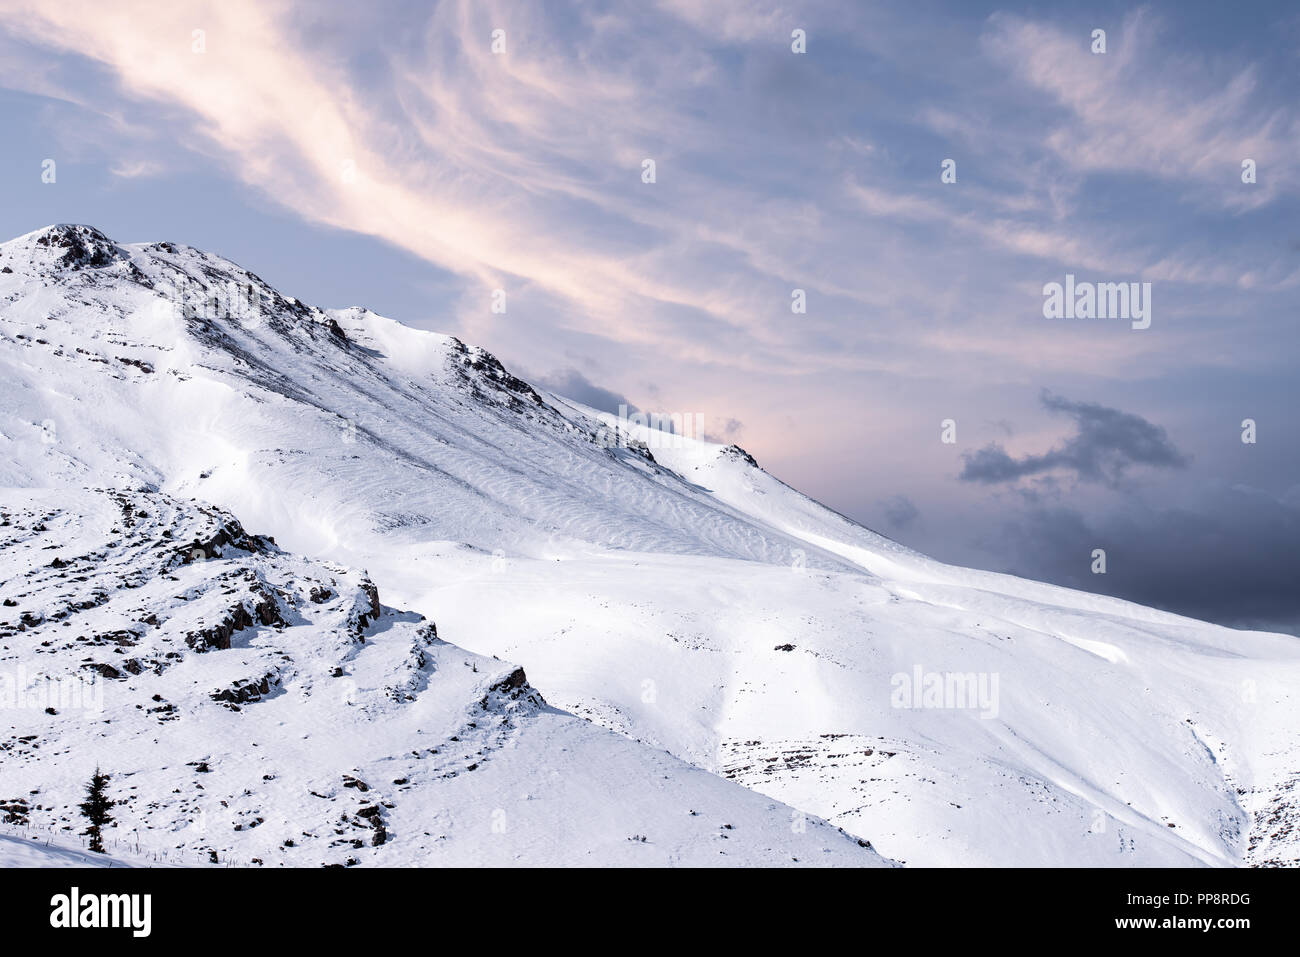 Beautiful winter landscape with snow-covered mountains at sunset. Stock Photo